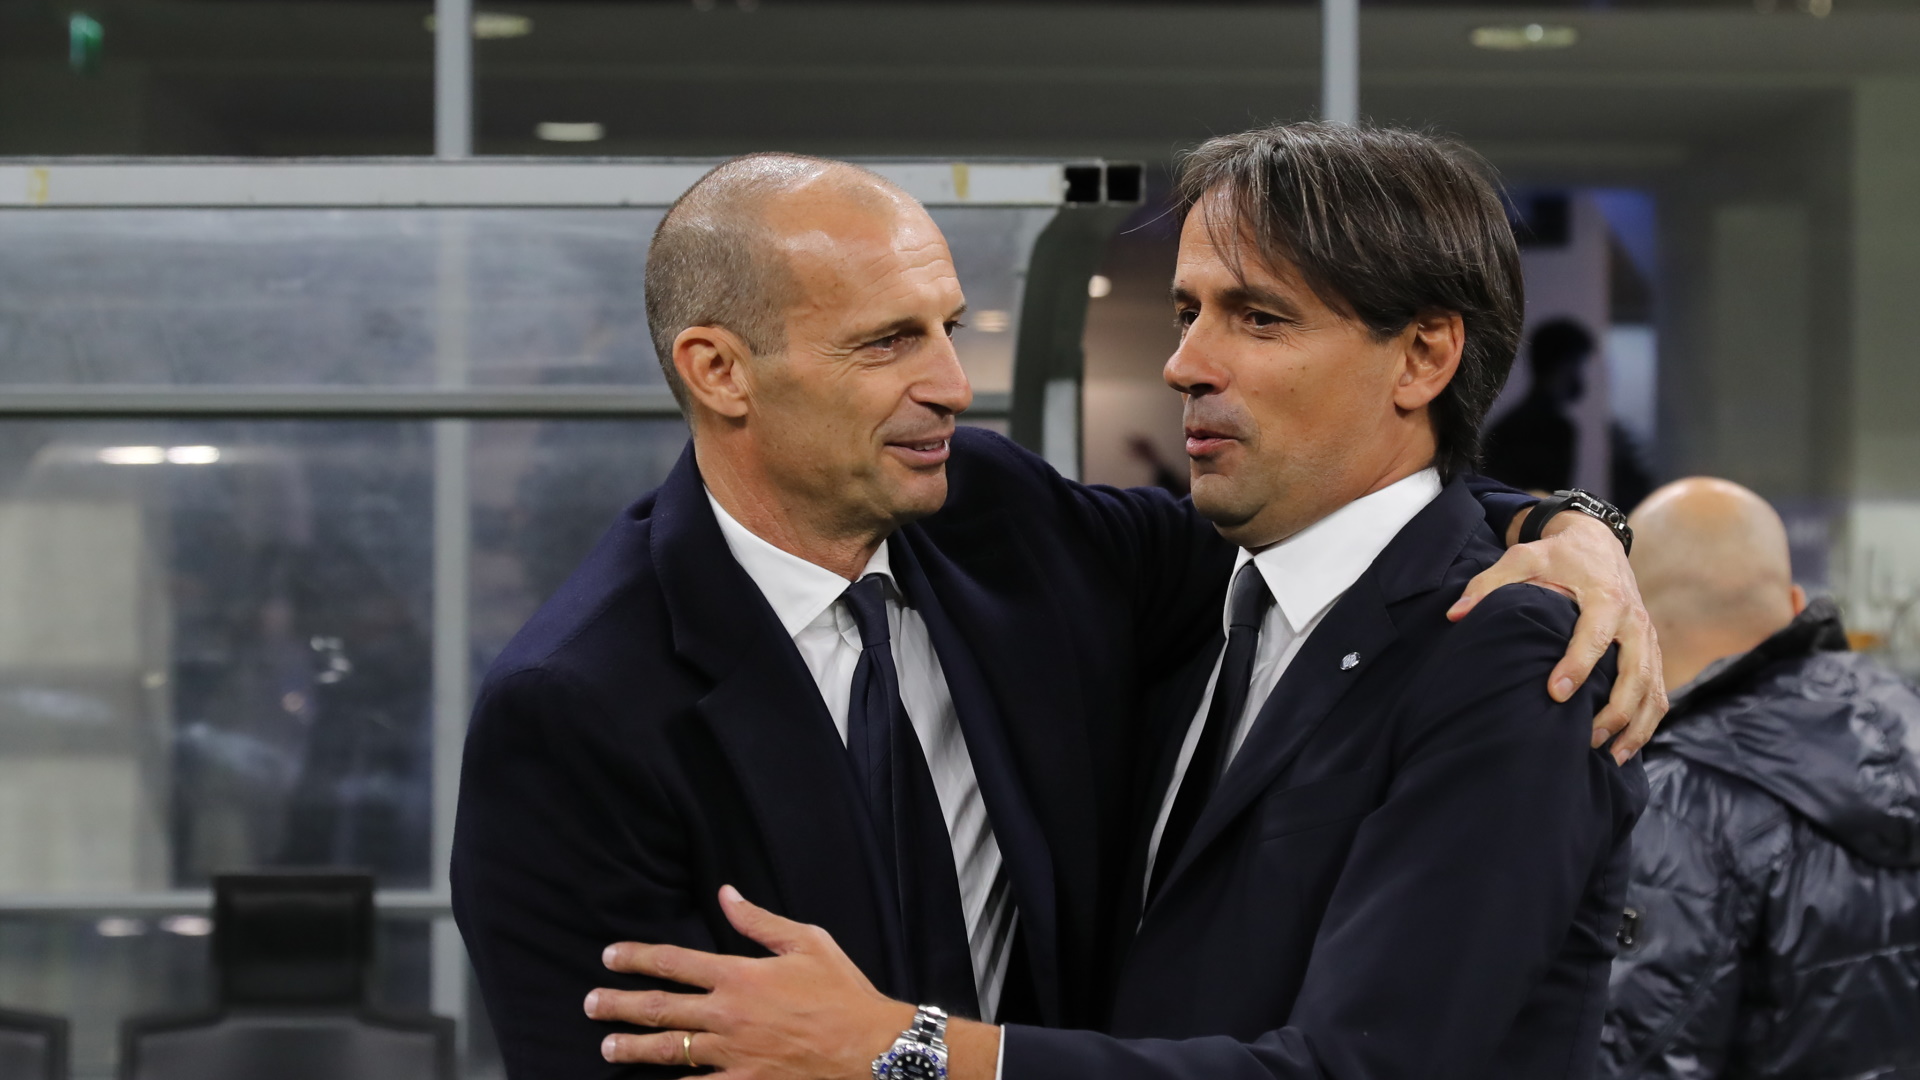 Allegri and Inzaghi to Keep Jobs but Face More Pressure